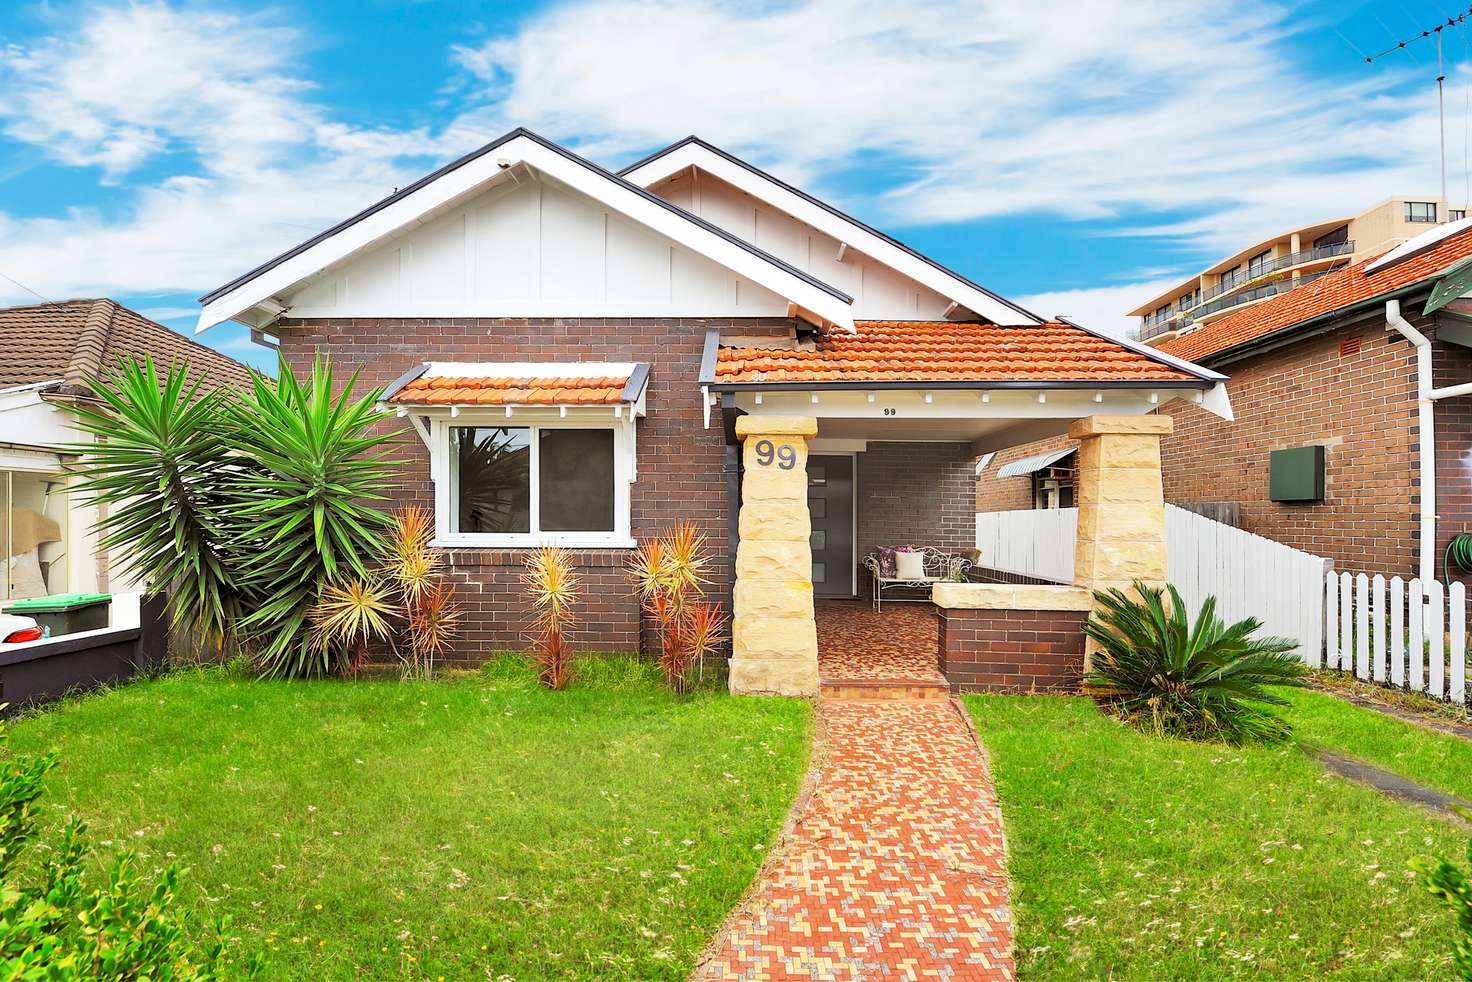 Main view of Homely house listing, 99 Gale Road, Maroubra NSW 2035